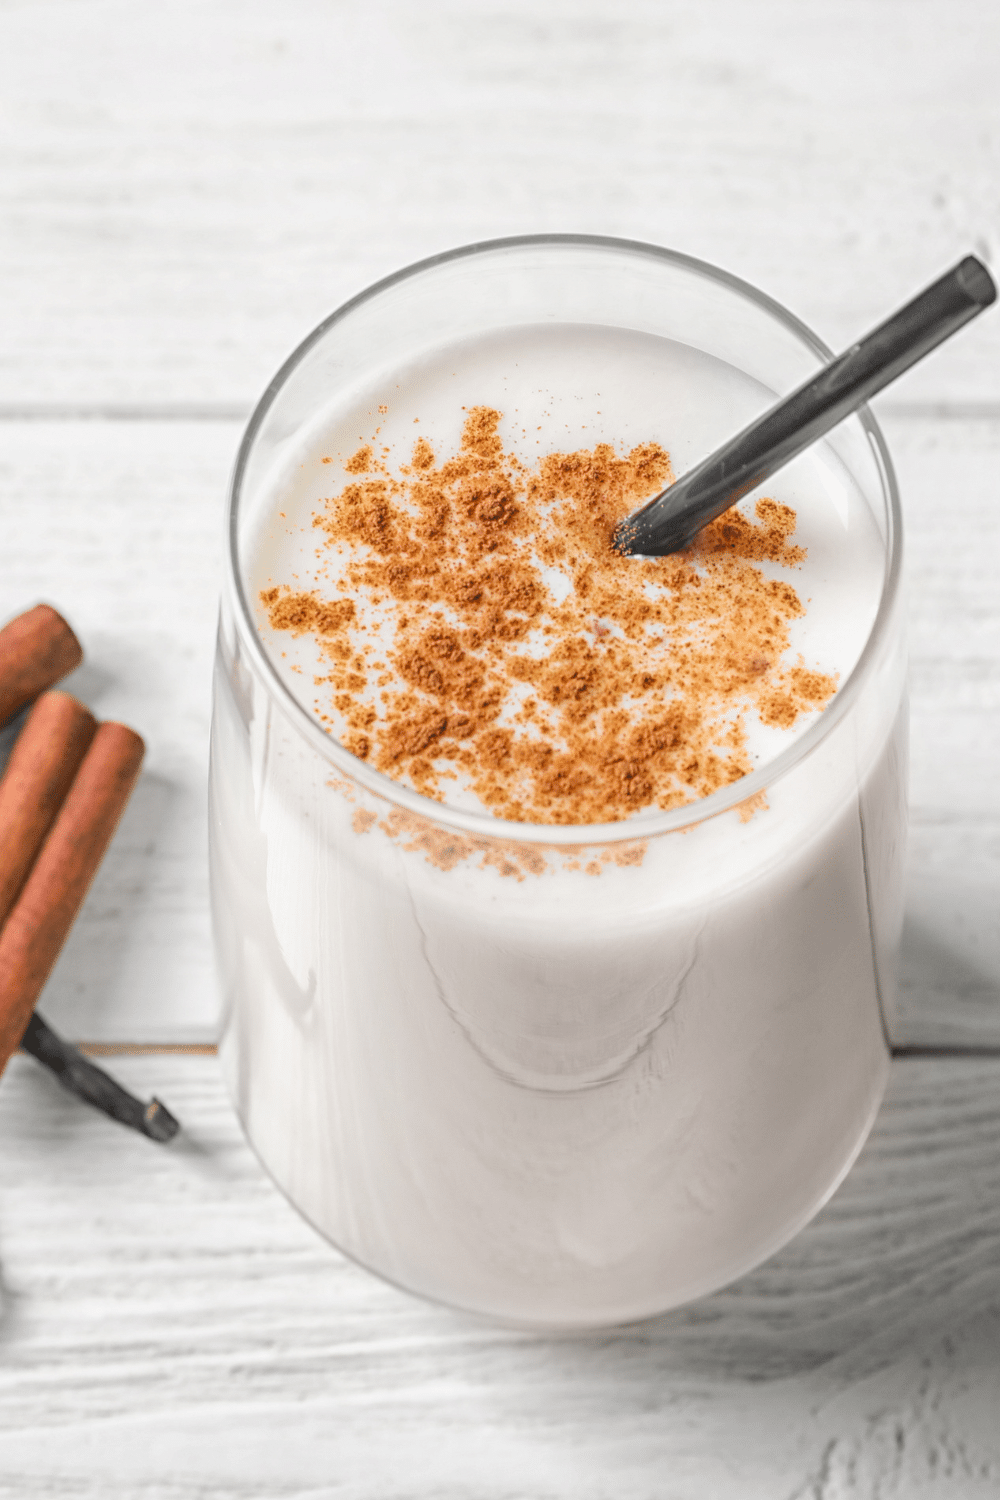 A beige-colored smoothie in a glass, sprinkled with ground cinnamon and flax seeds.